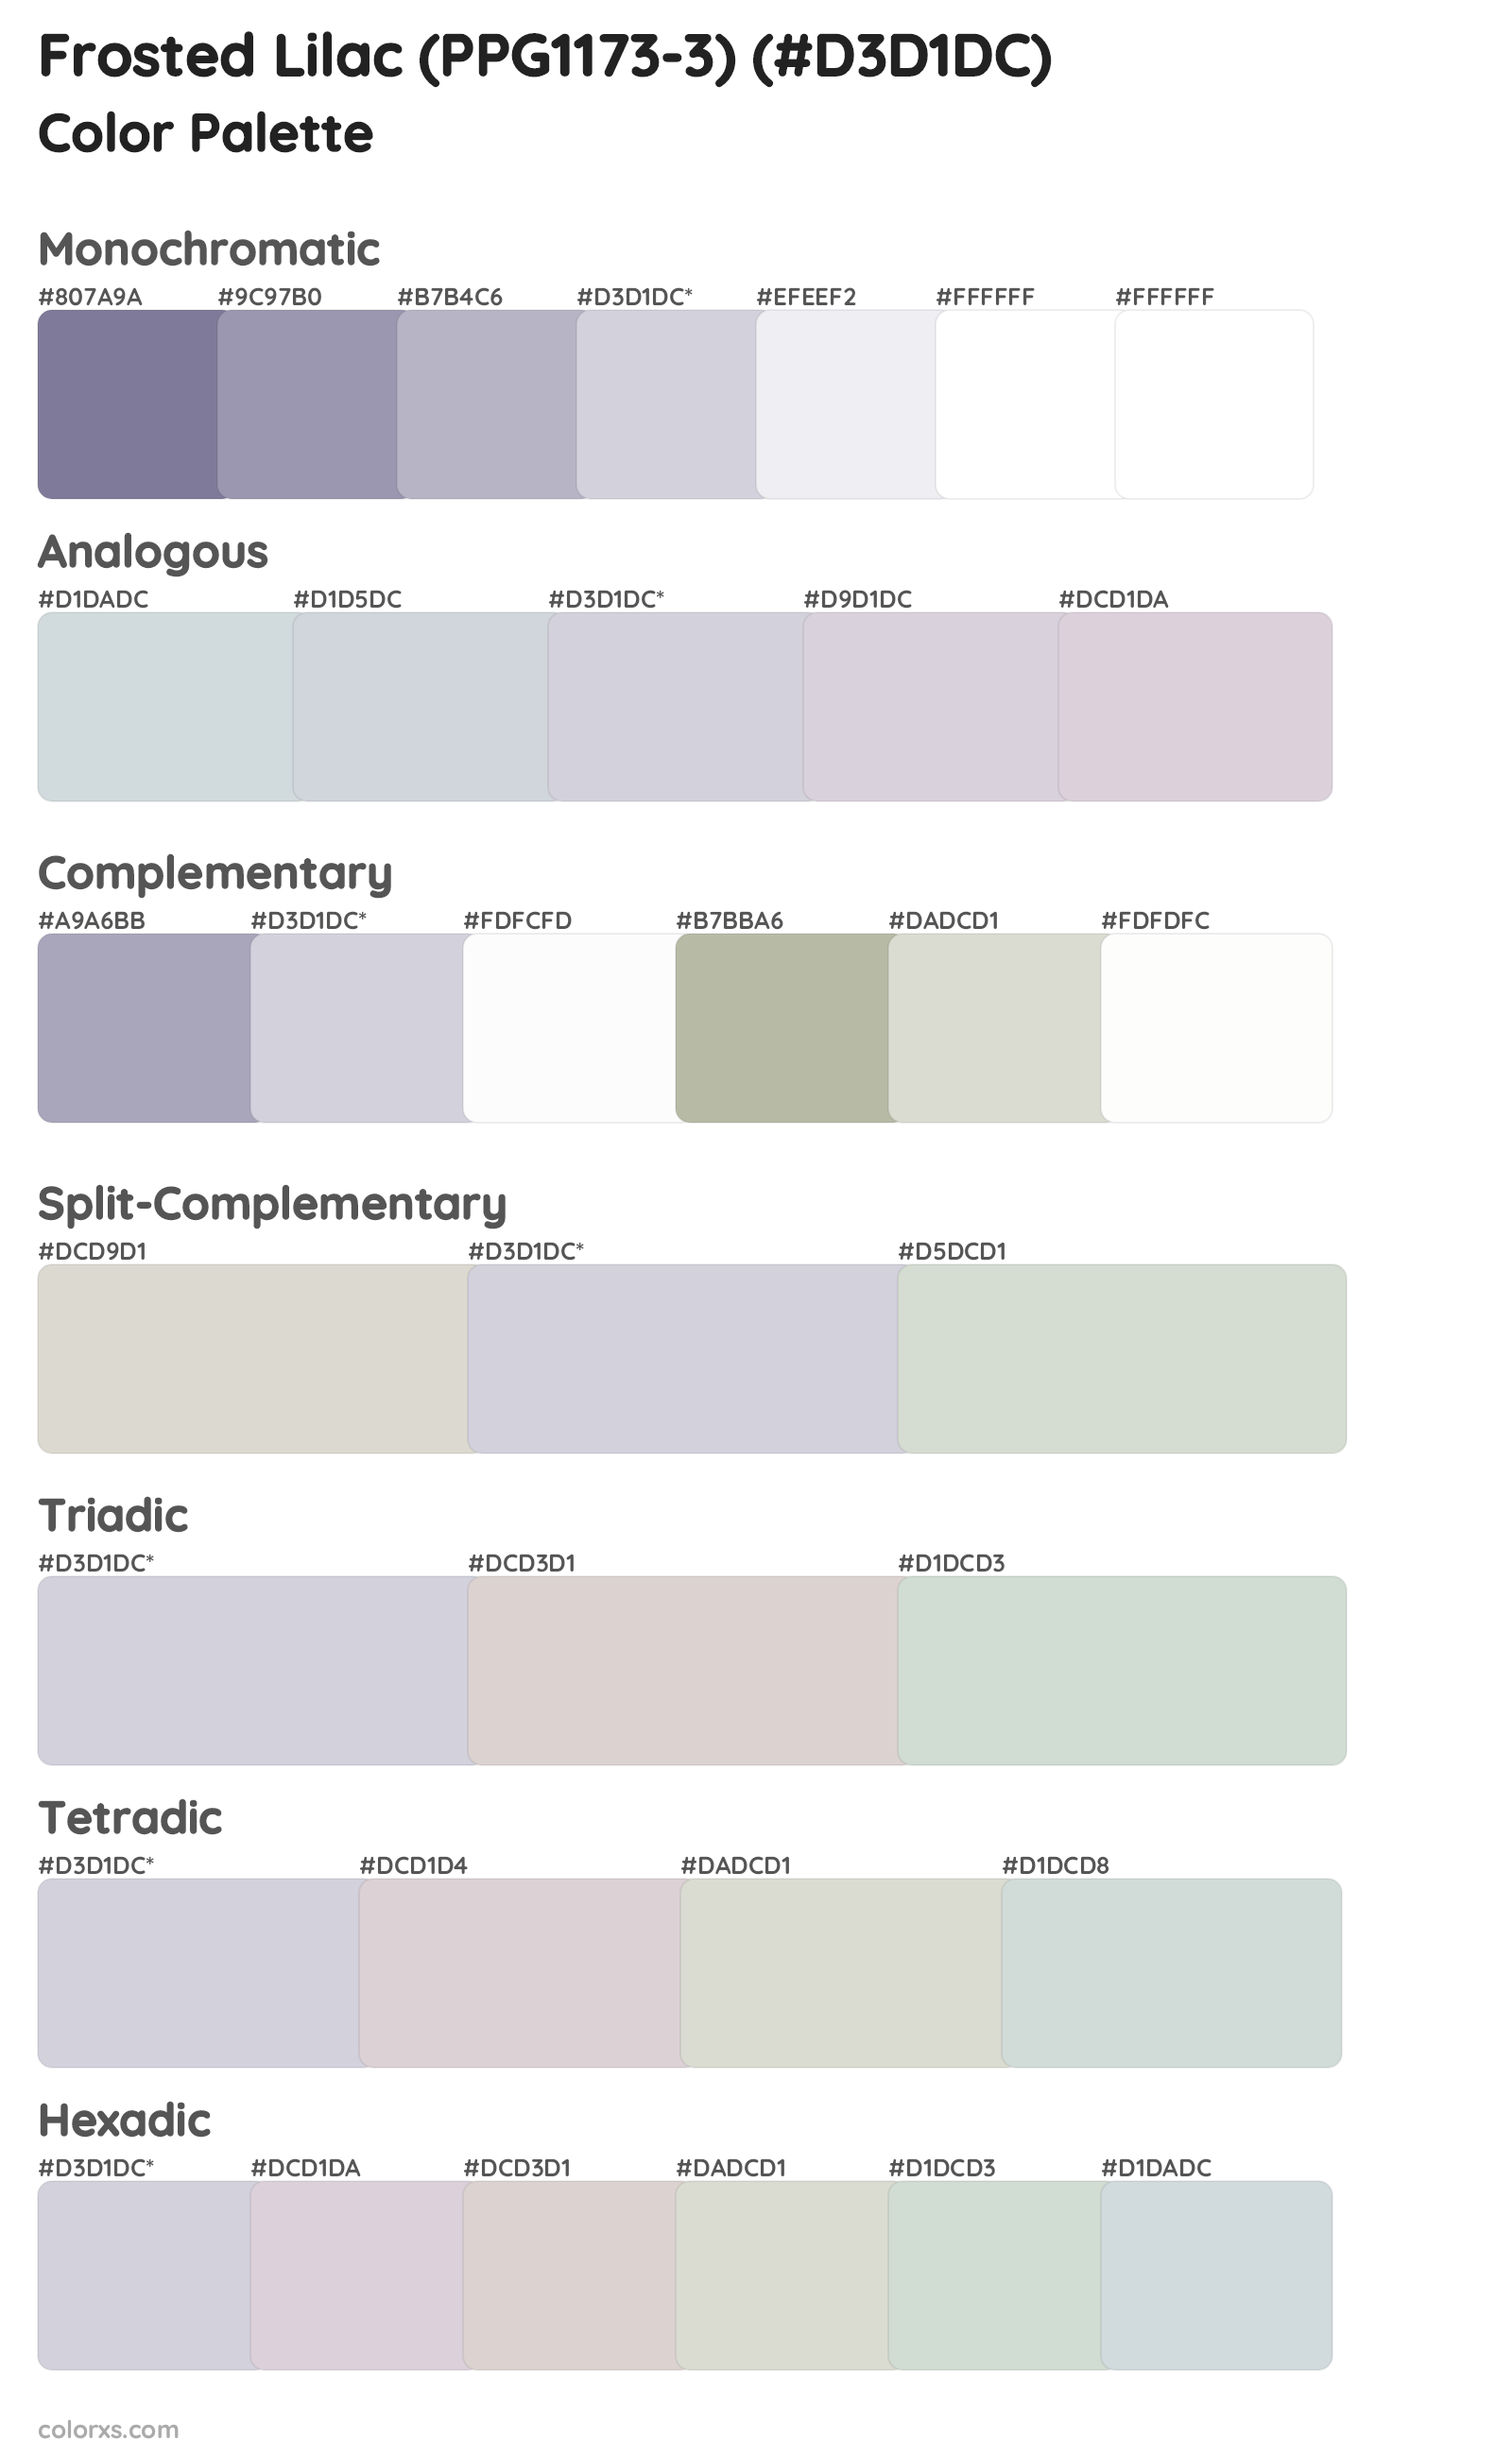 Frosted Lilac (PPG1173-3) Color Scheme Palettes